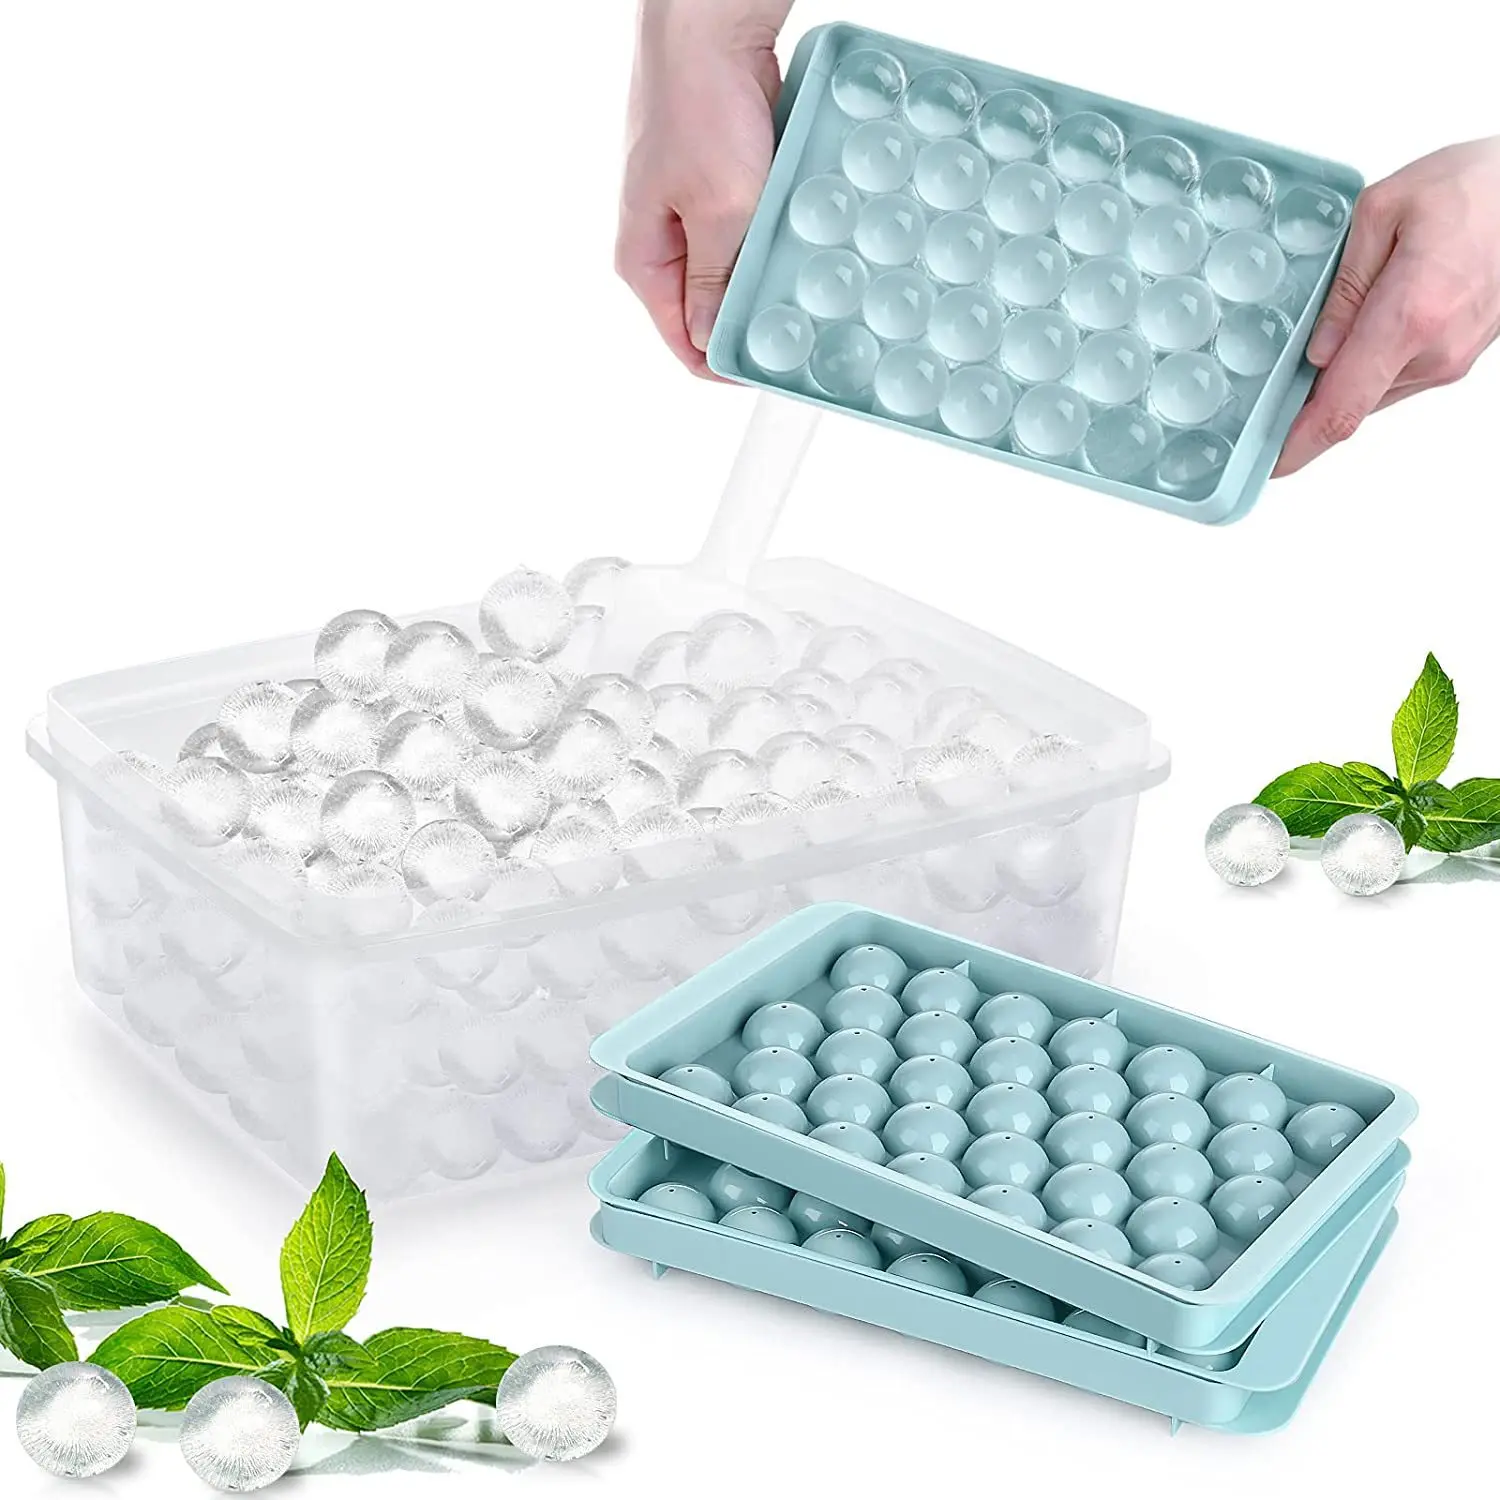 

33 Ice Boll Hockey PP Mold Frozen Whiskey Ball Popsicle Ice Cube Tray Box Lollipop Making Gifts Kitchen Tools Accessories